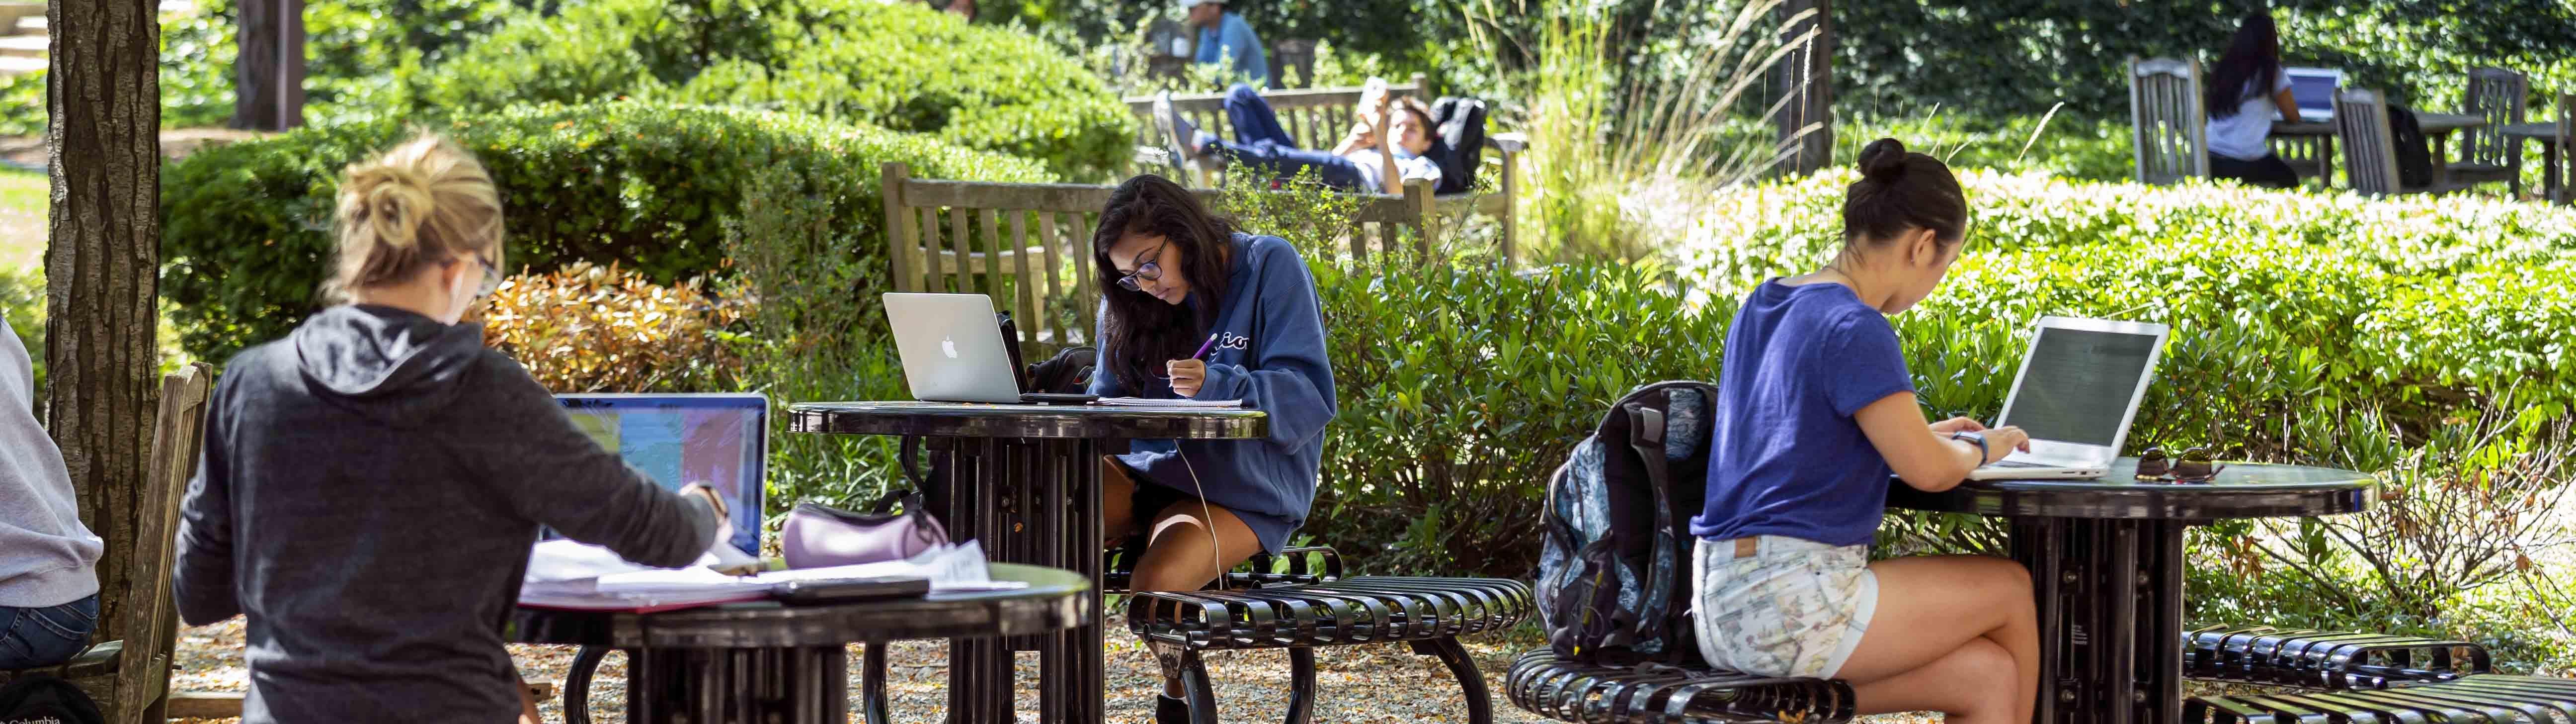 Students on computers outdoors